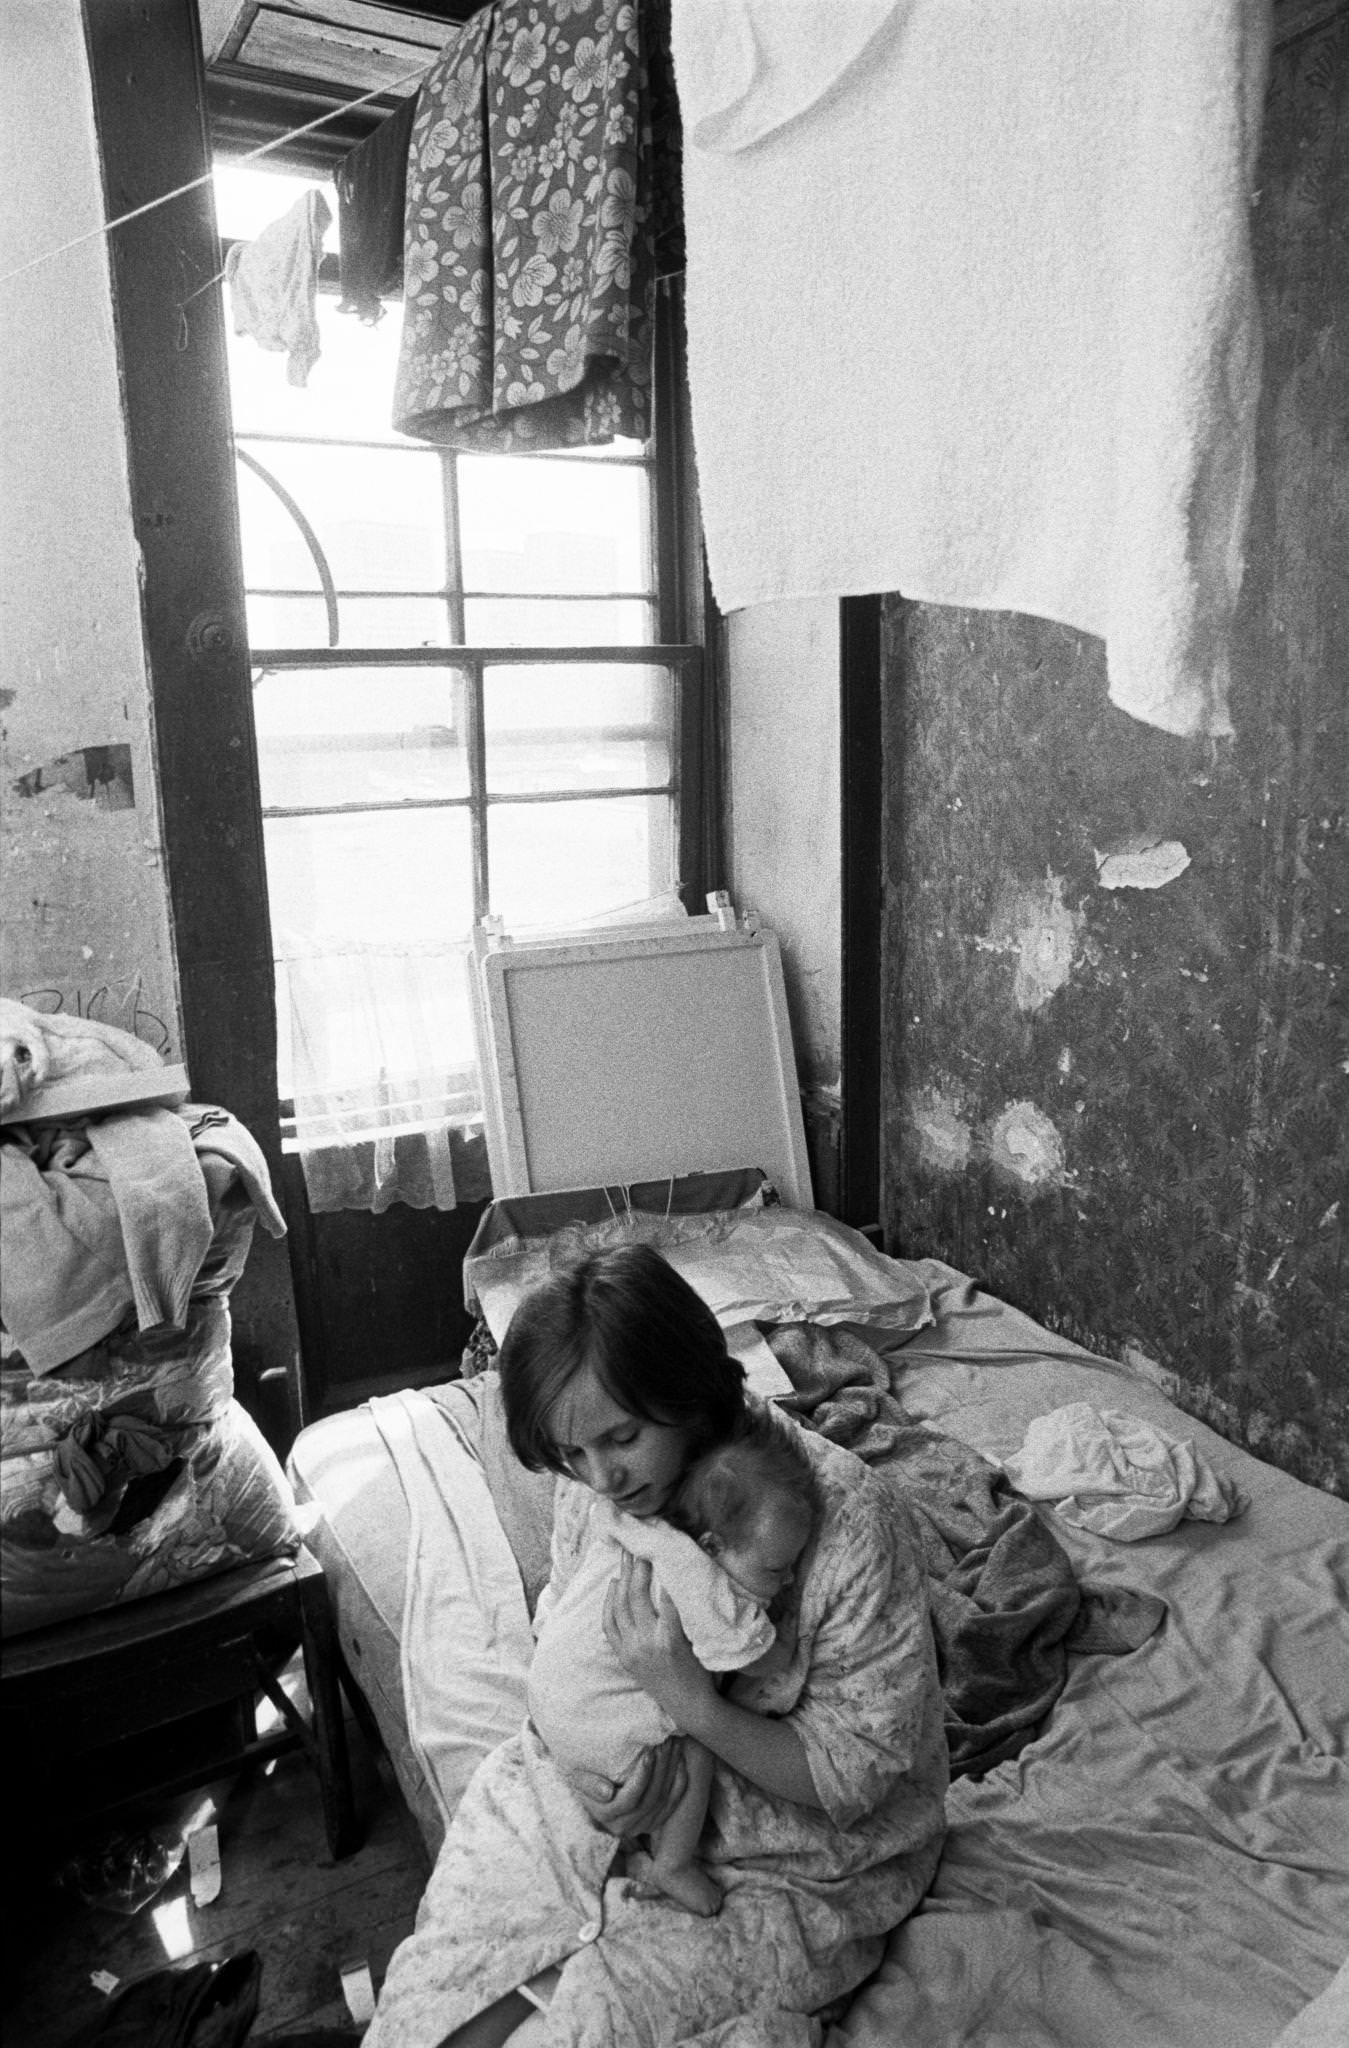 A young girl holding a little baby in her flat in the notorious Gorbals district of Glasgow, 1969.